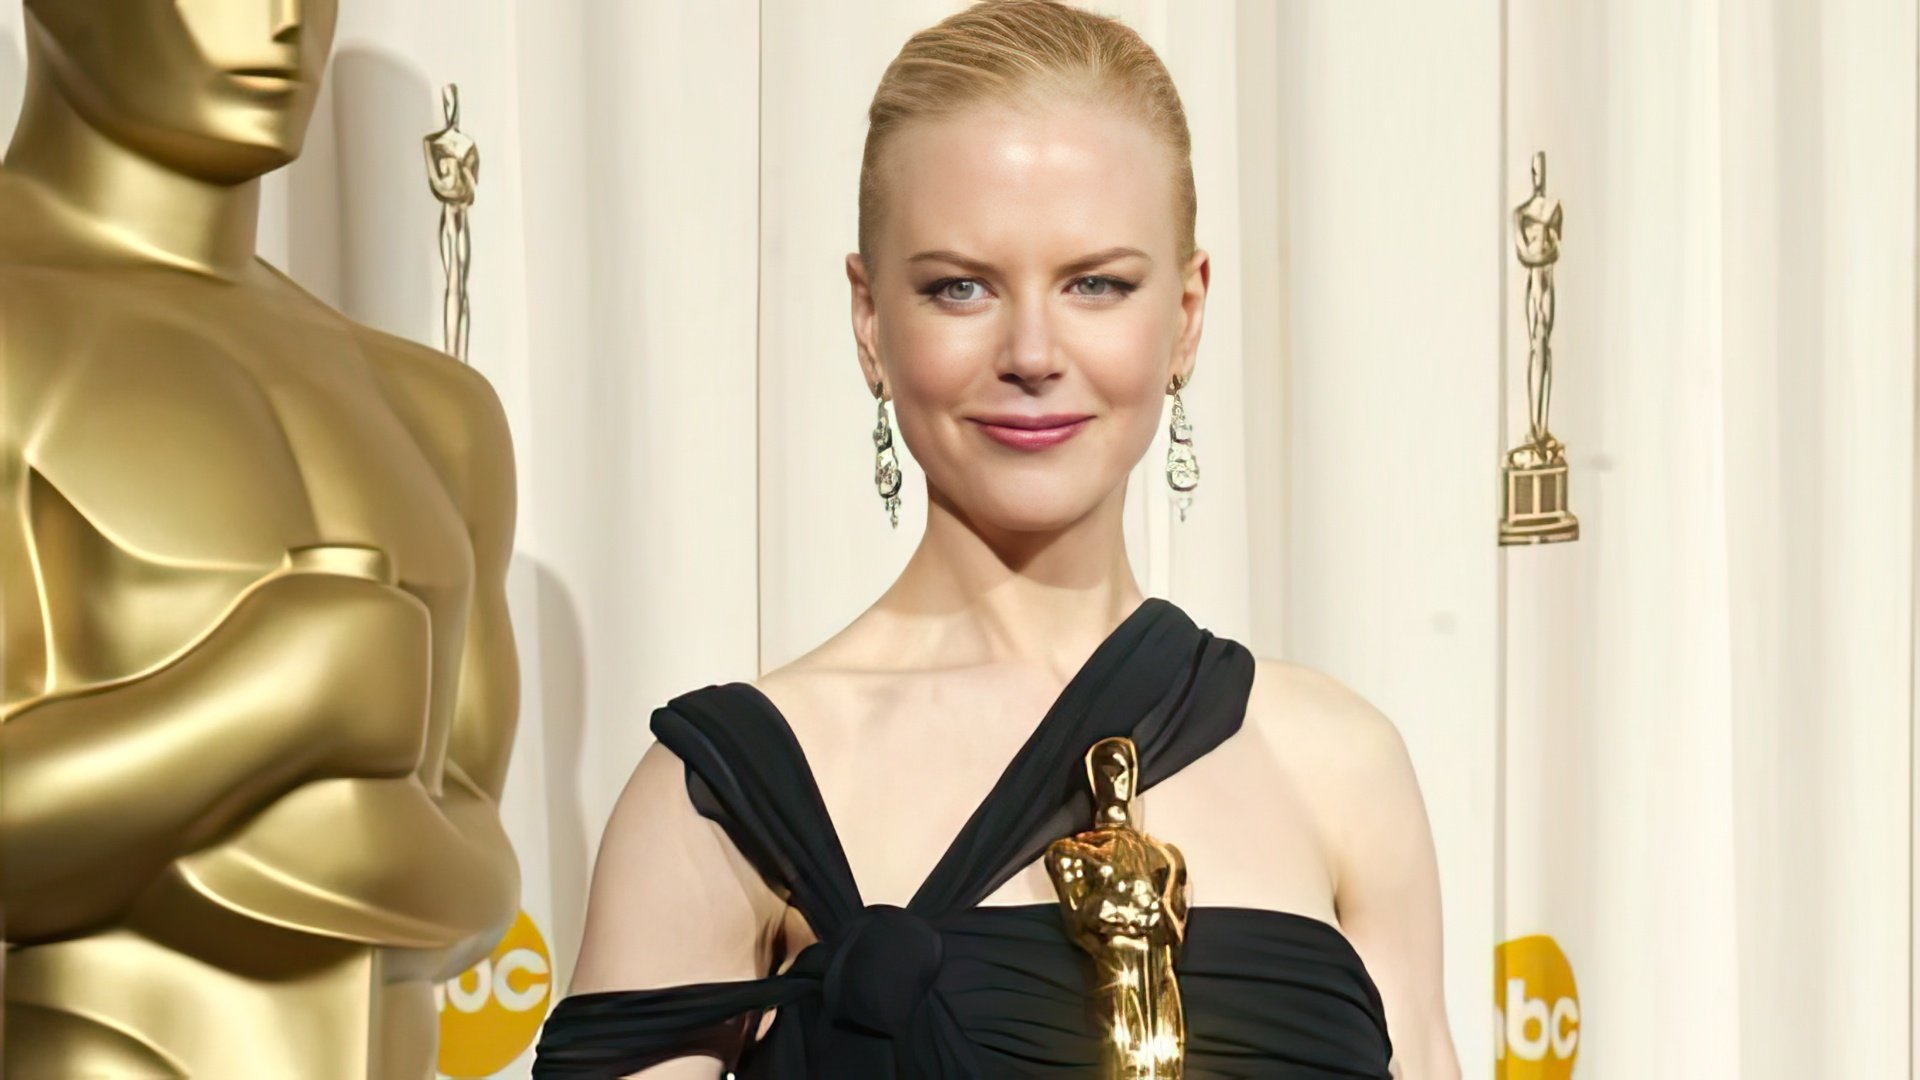 Nicole Kidman with her “Oscar” for the Best Actress in 2002